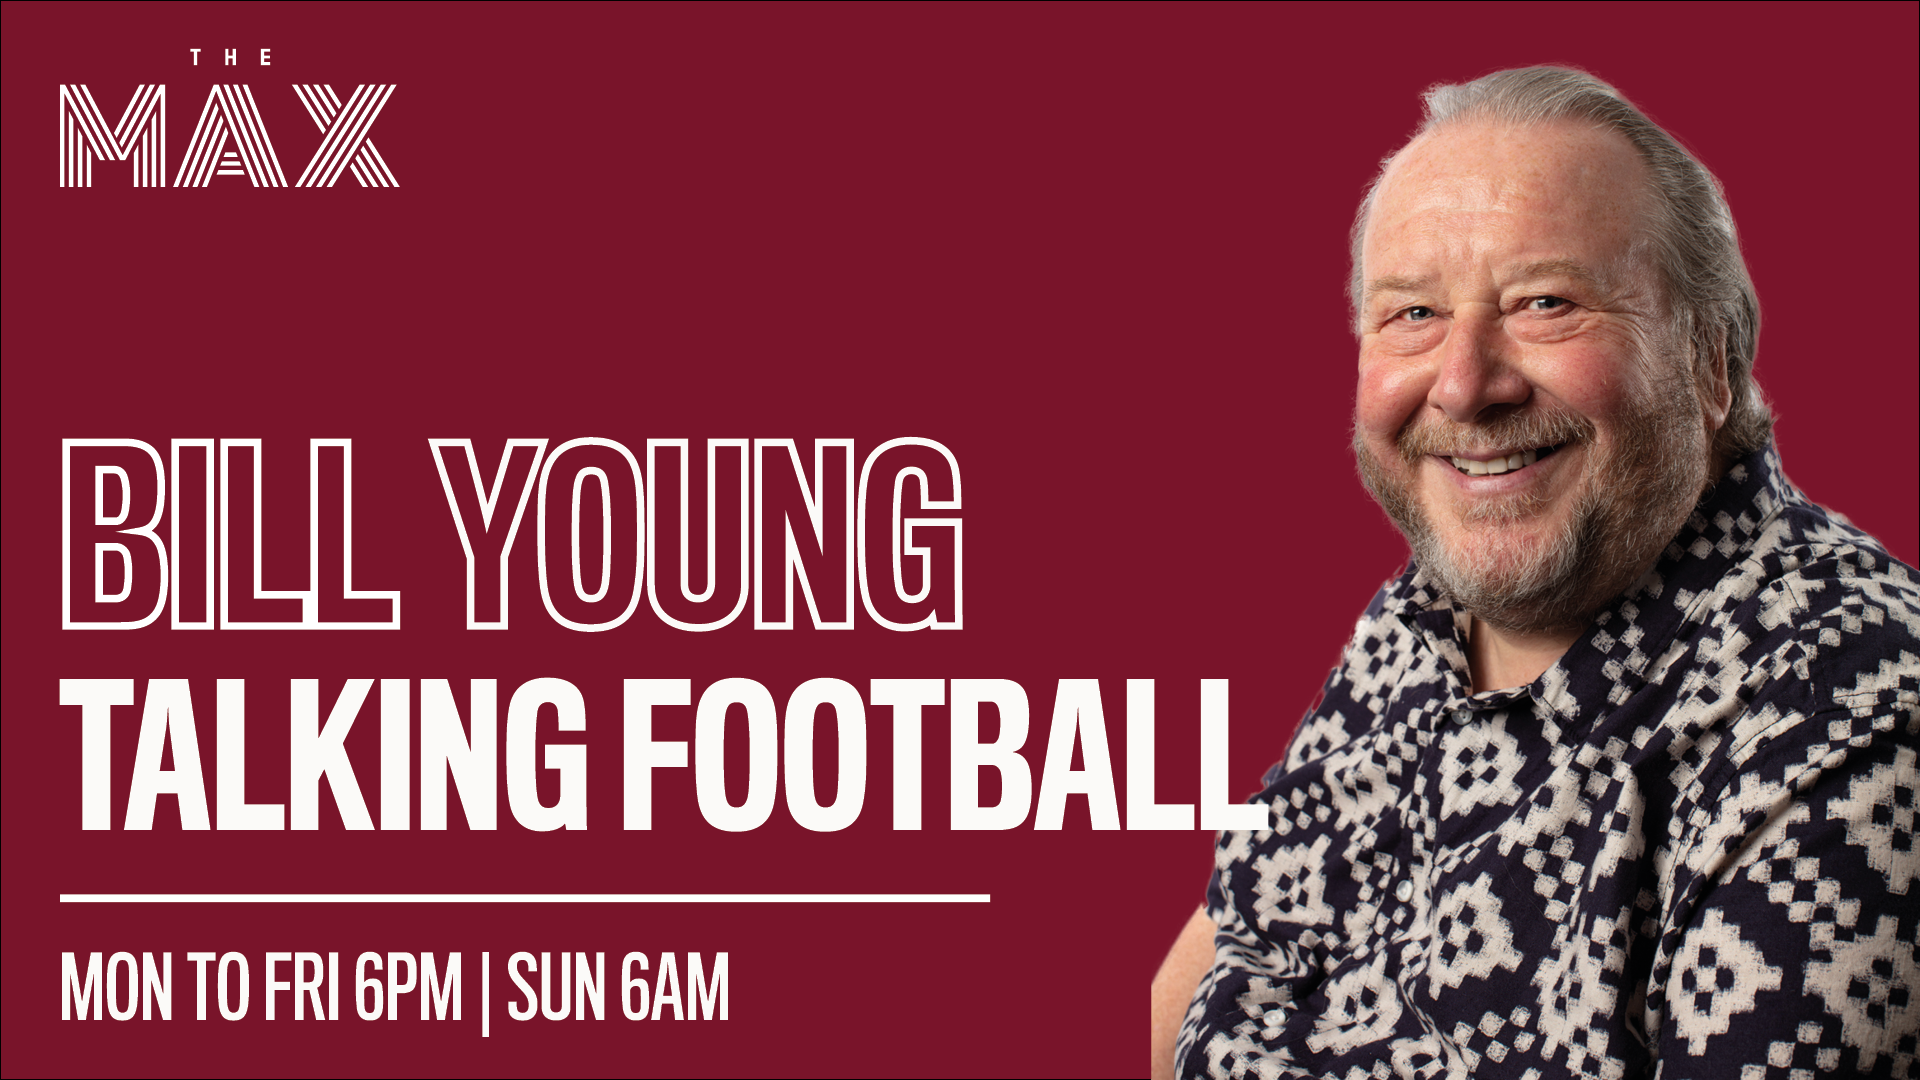 Talking Football with Bill Young - Tuesday 13th April